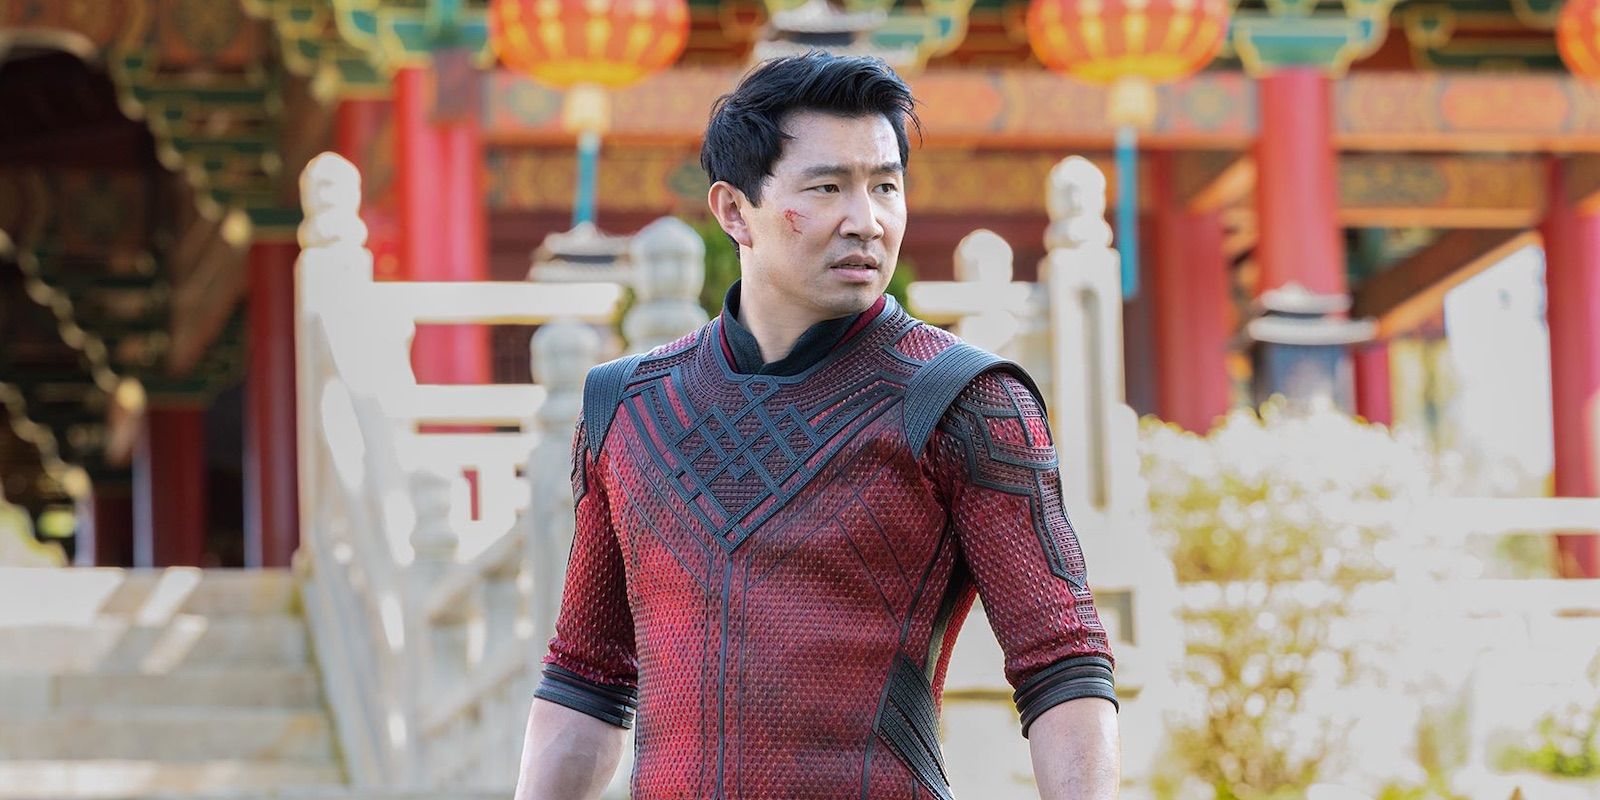 Simu Liu as Shang-Chi in Shang Chi and the Legend of the Ten Rings (2021).